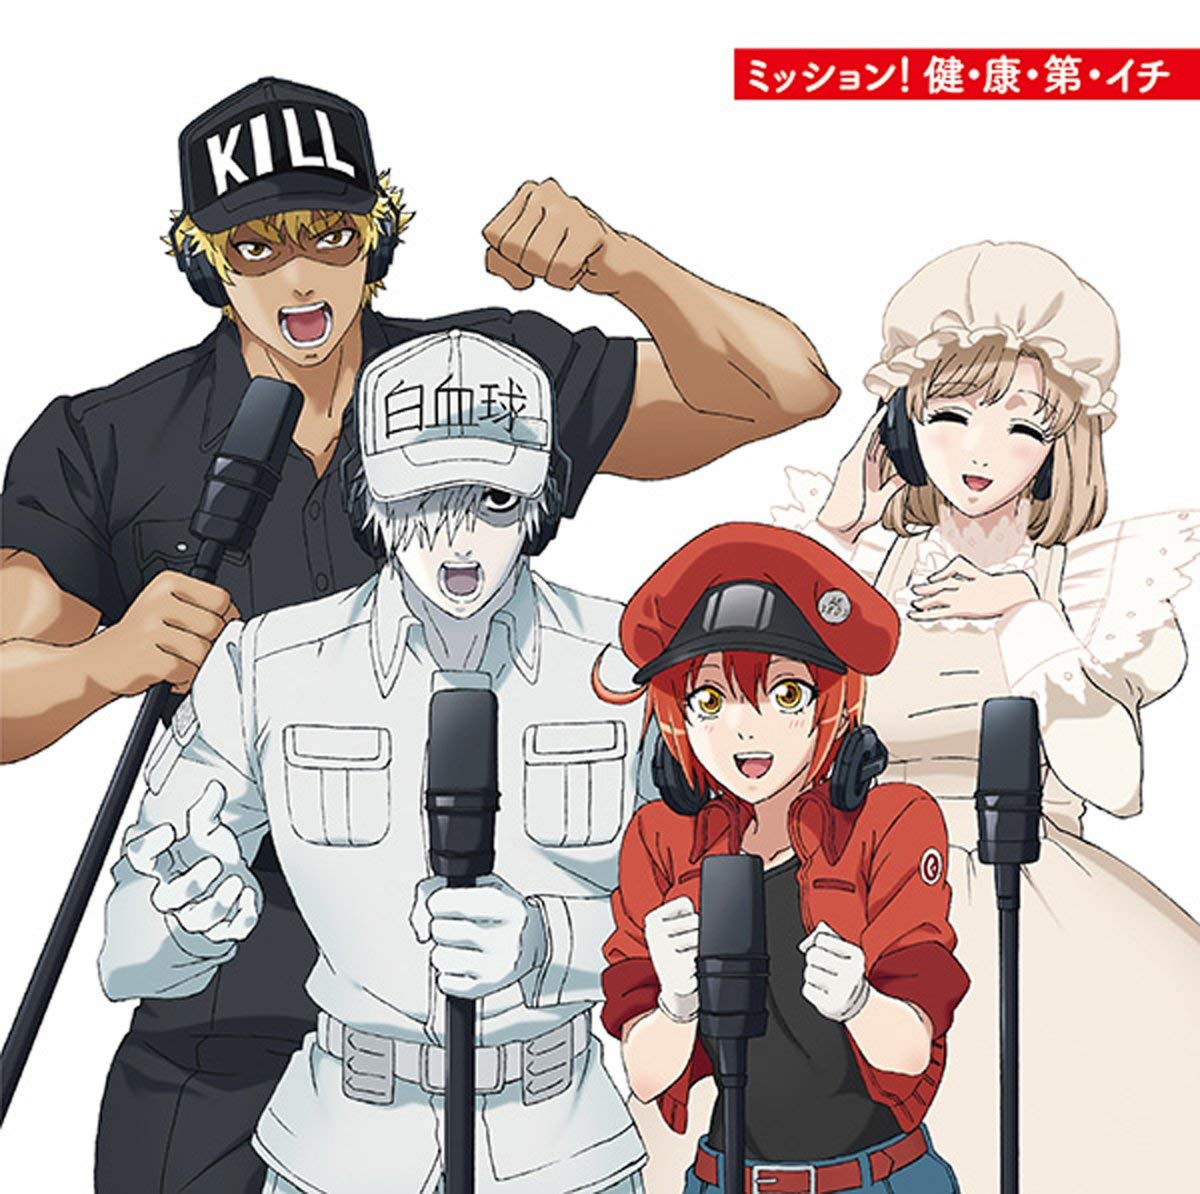 NT4201, Cells at Work! Wiki